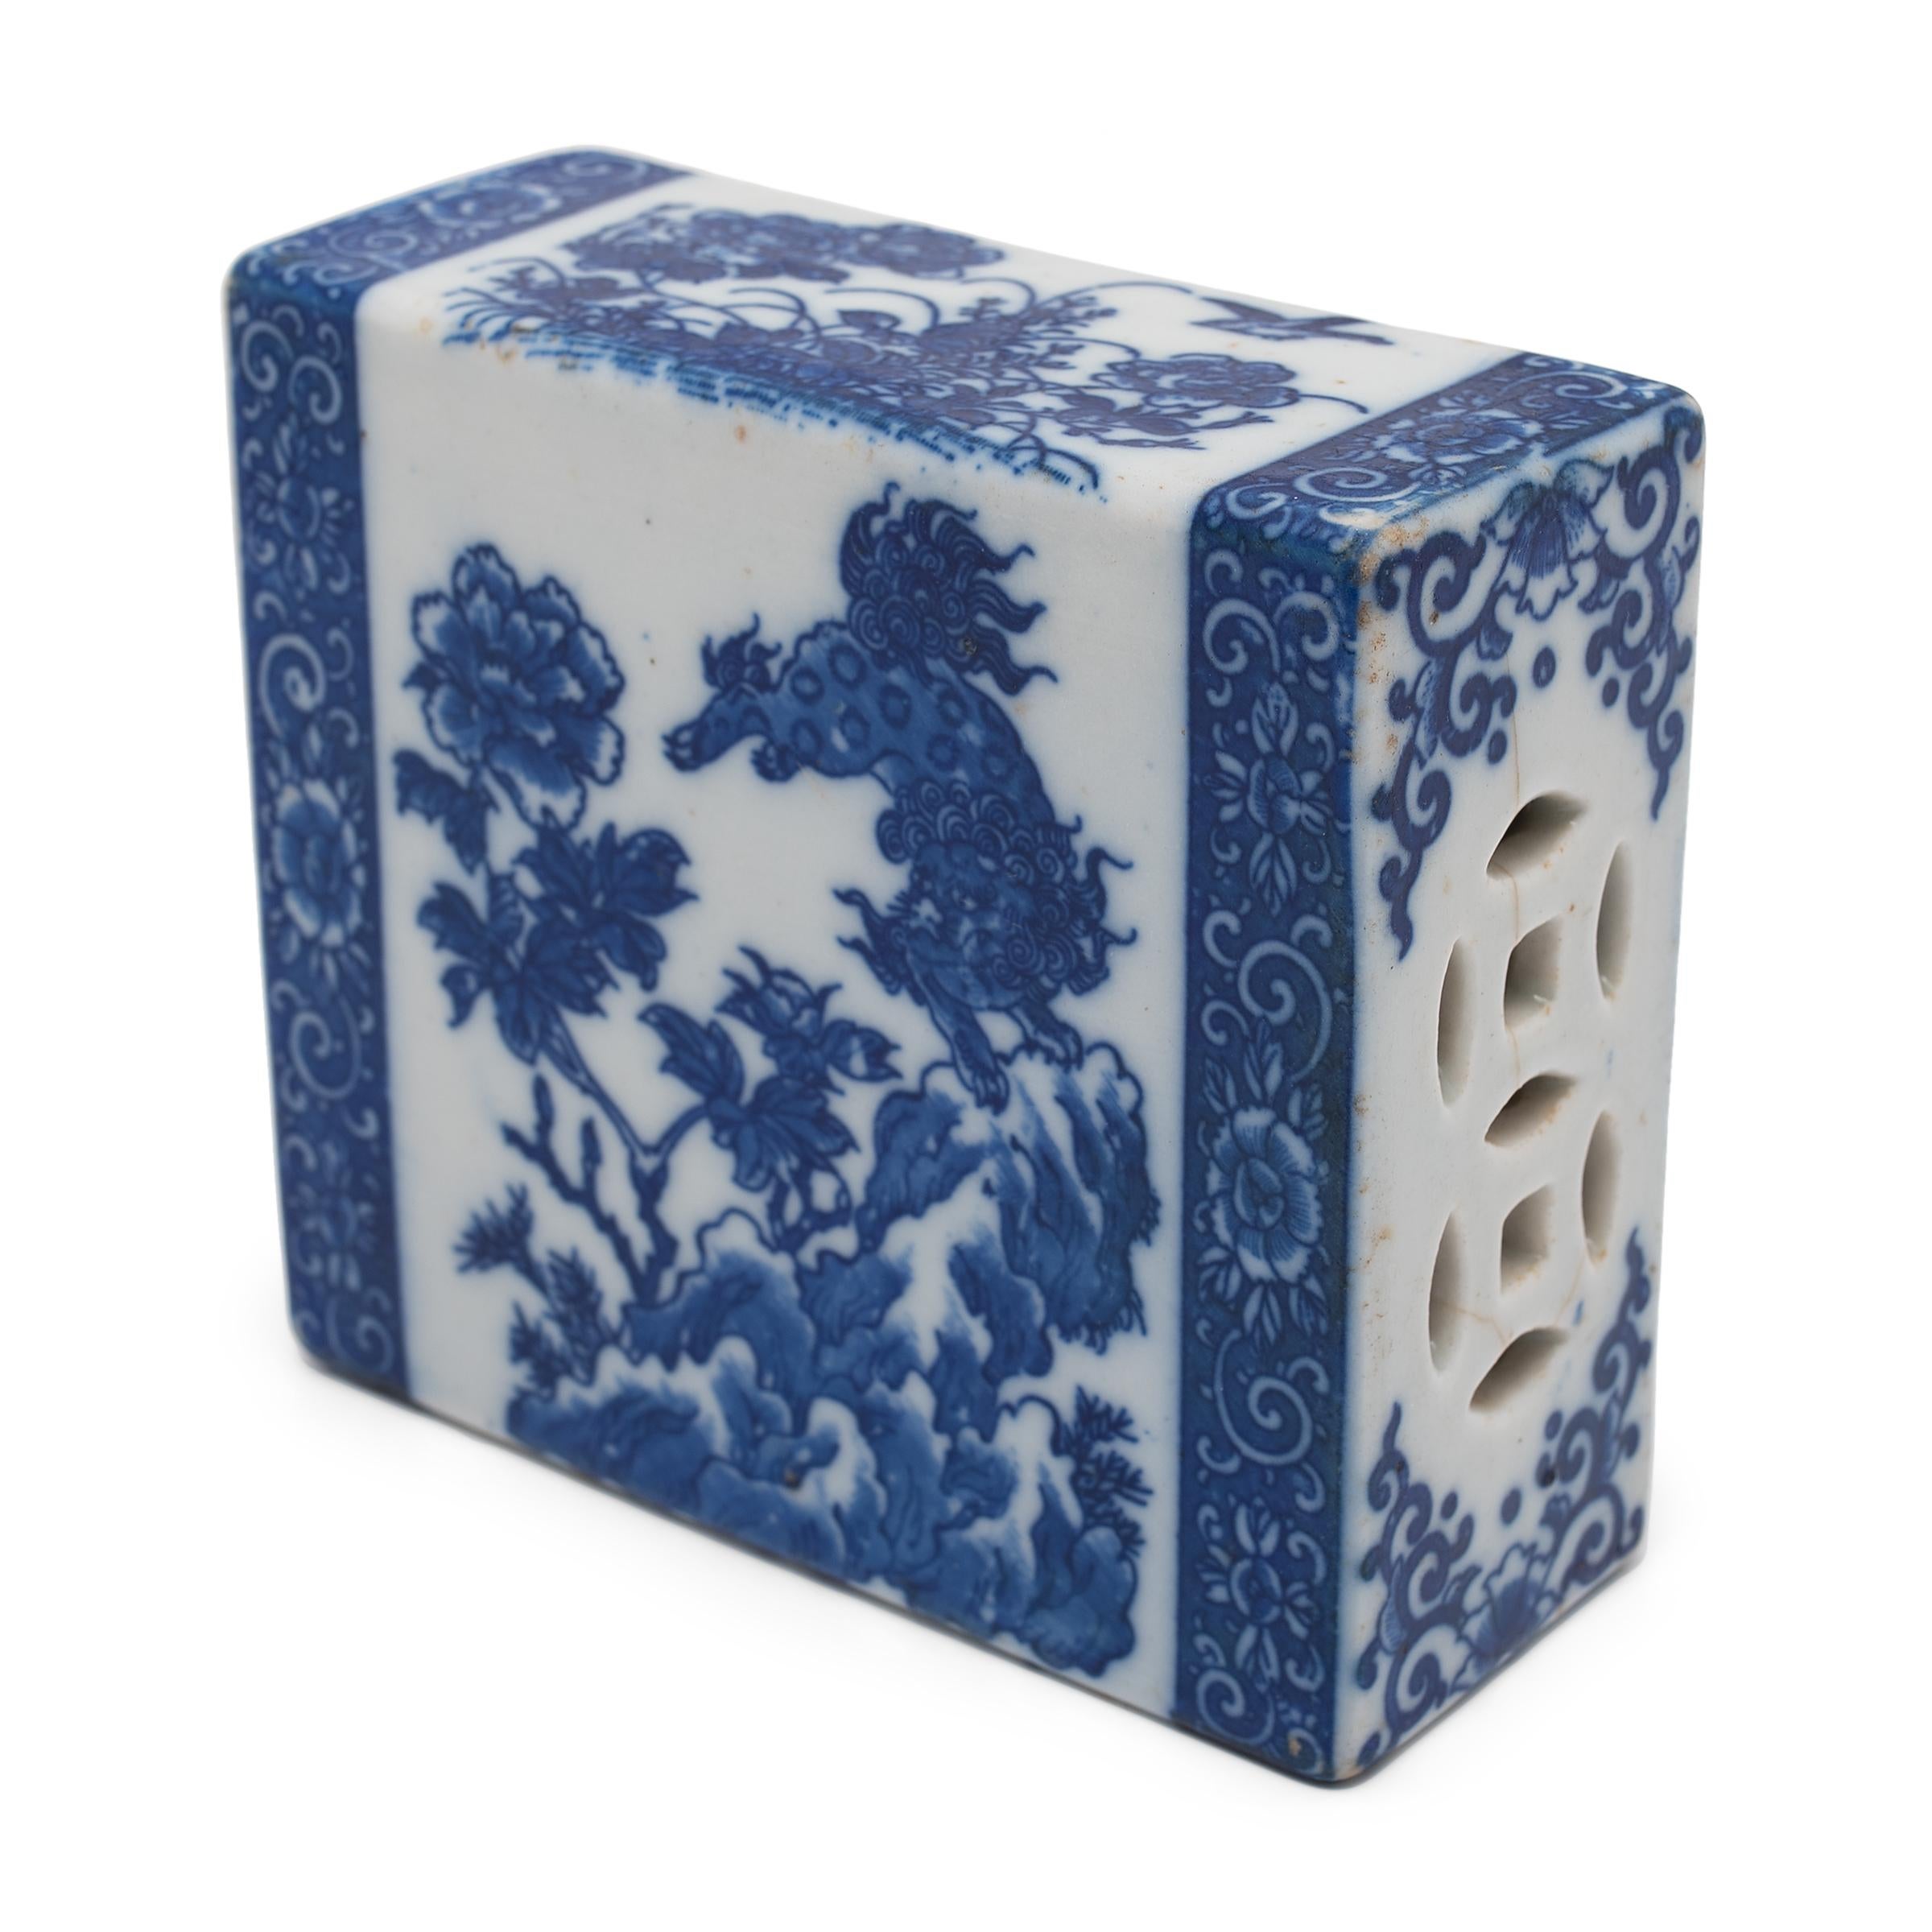 This small ceramic block is actually a form of Chinese headrest or neck pillow. Popular during the Qing dynasty, rigid headrests such as this were used by upper-class women to protect their elaborate hairstyles by elevating the head during slumber.